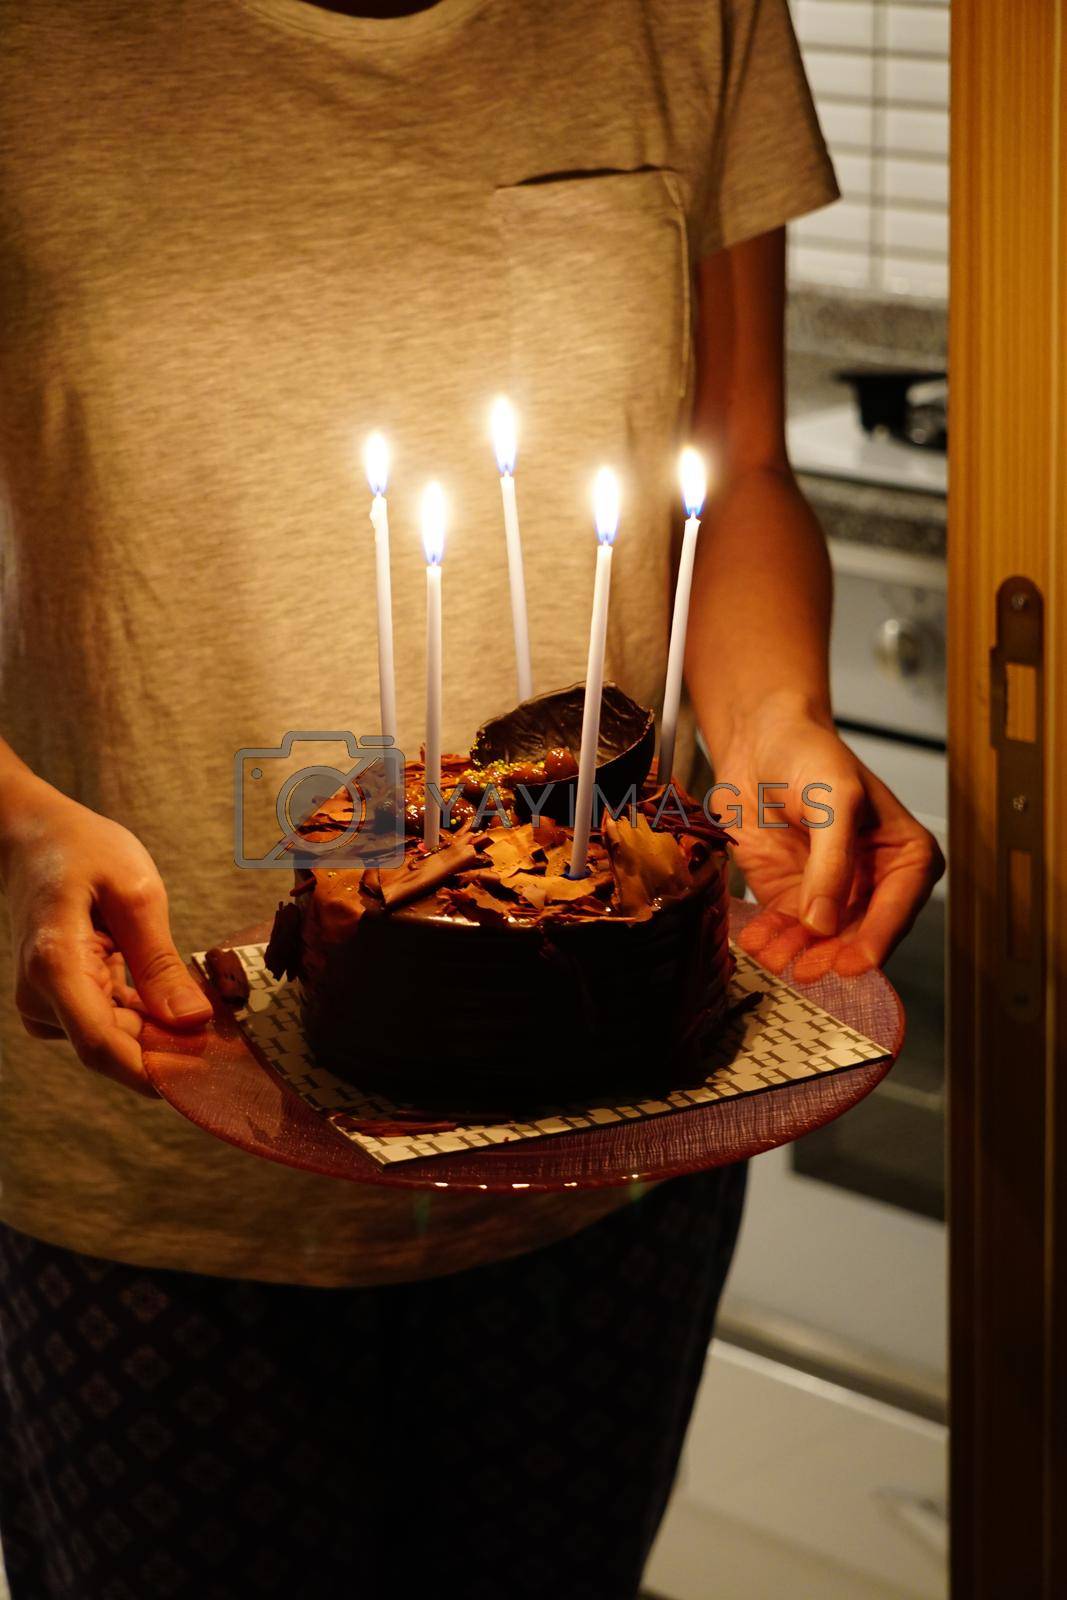 Birthday celebration chocolate cake with candles on